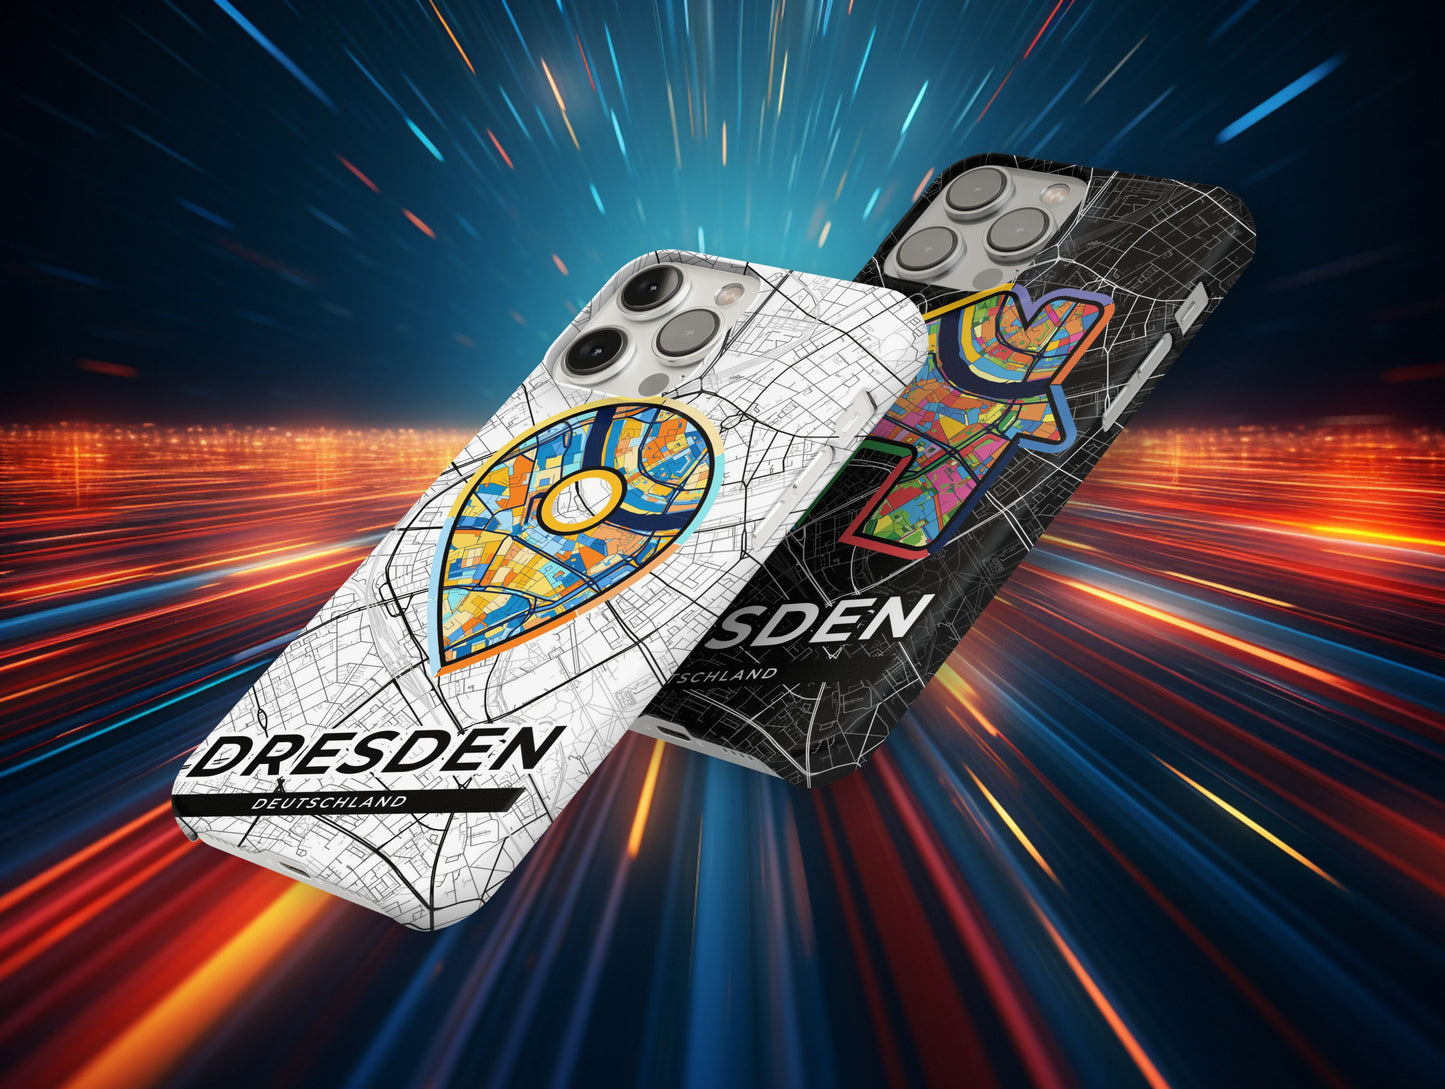 Dresden Deutschland slim phone case with colorful icon. Birthday, wedding or housewarming gift. Couple match cases.